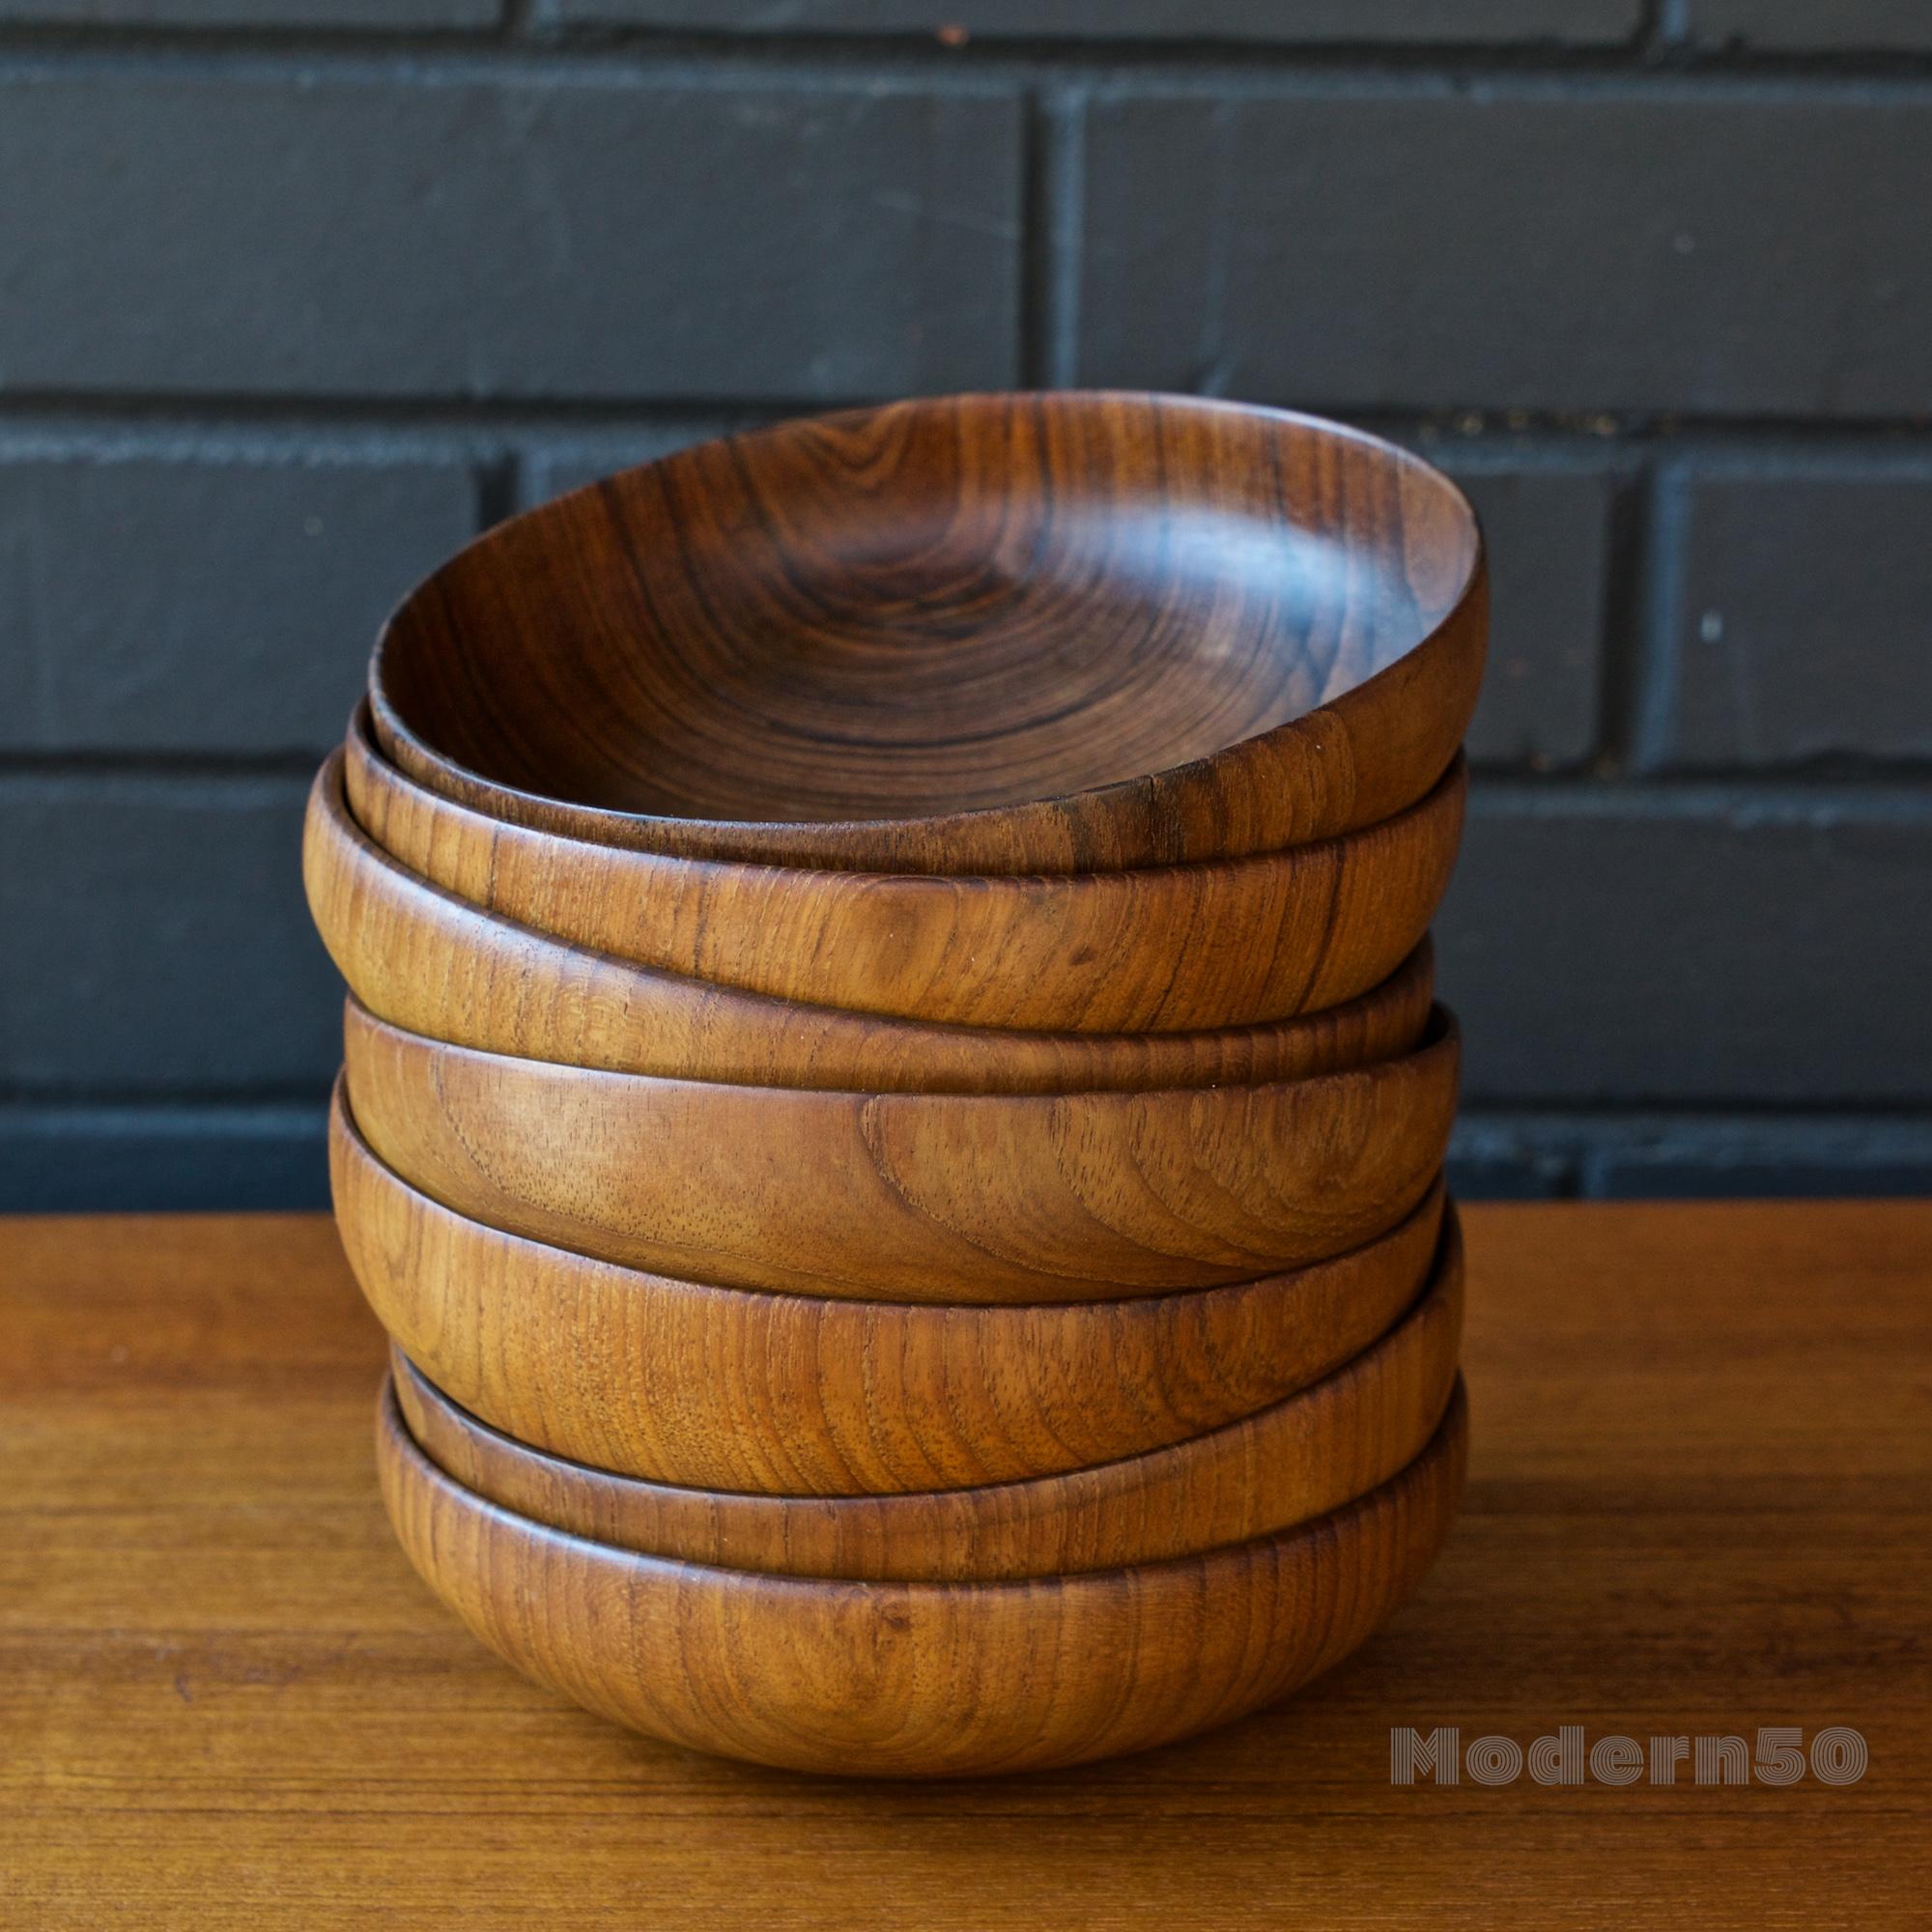 Executed by an unknown craftsman, an amazing set of 7 turned solid teak small bowls. Expertly thin edged, hand done and showing variations to the details in each bowl. No lathe markings, and No foot, an ever so slightly arcing bottom. No label, no